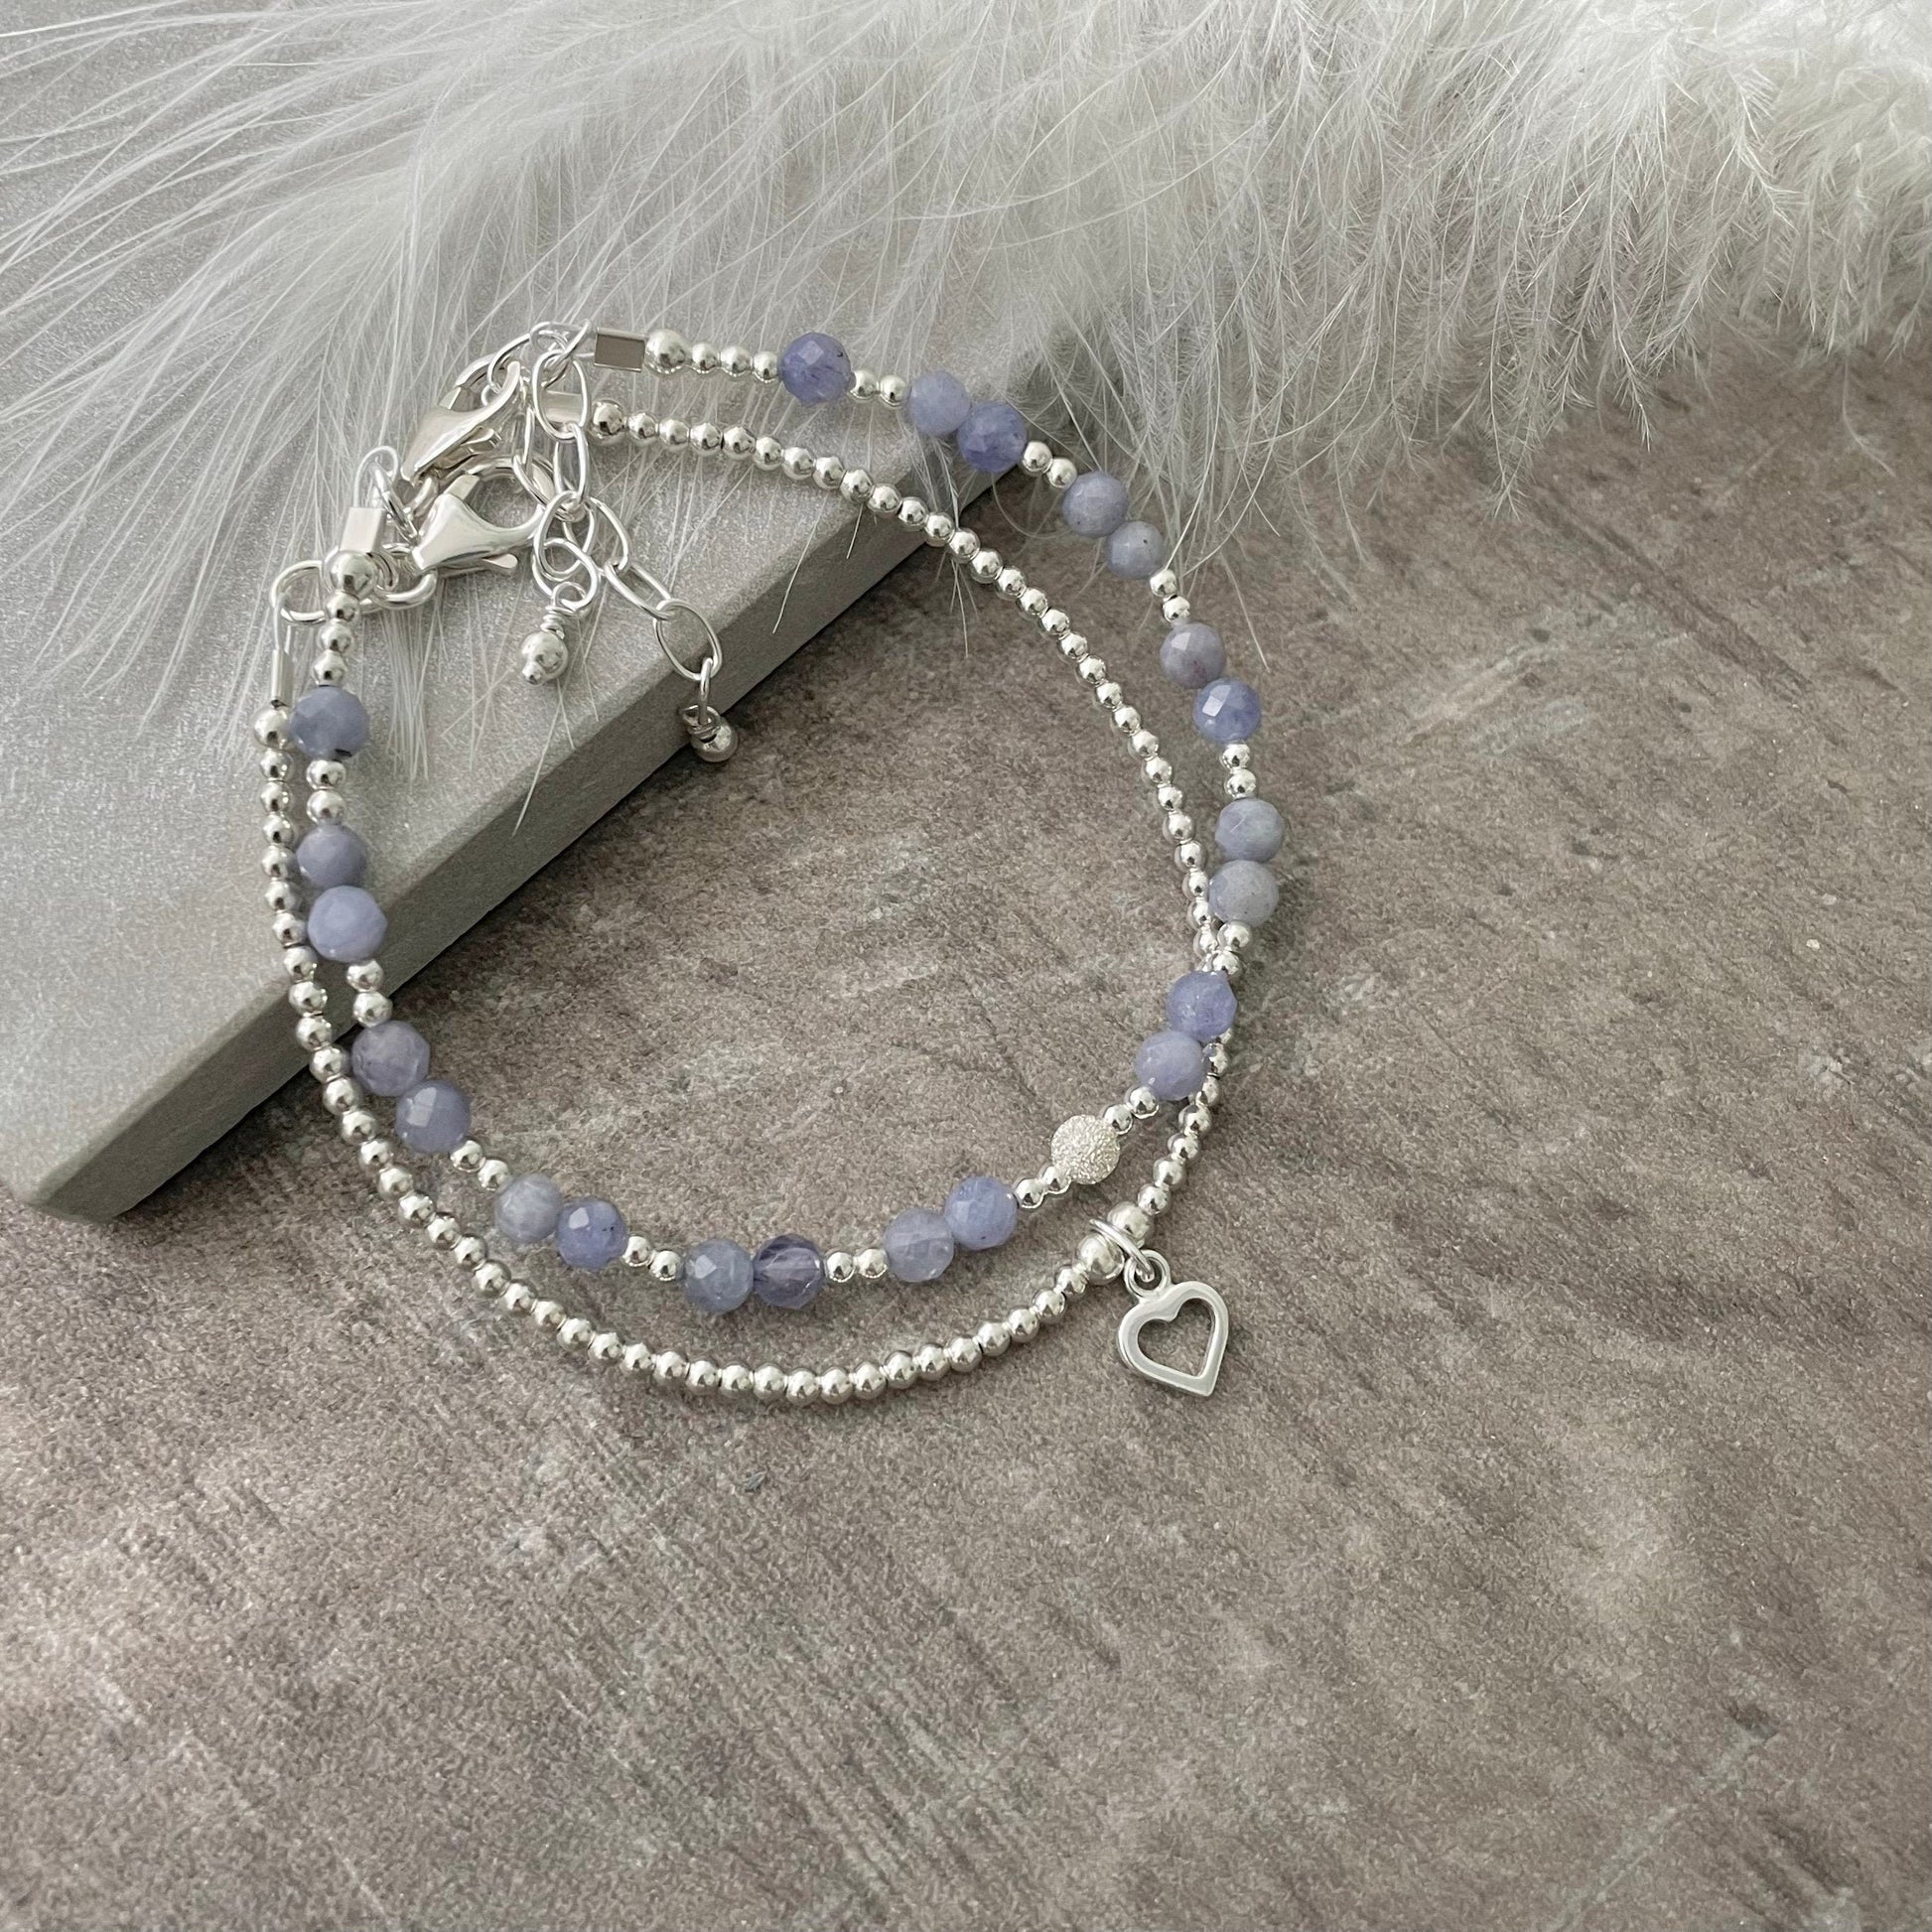 Tanzanite Bracelet Set made with December Birthstone and Sterling Silver, December Birthday Gift for Women